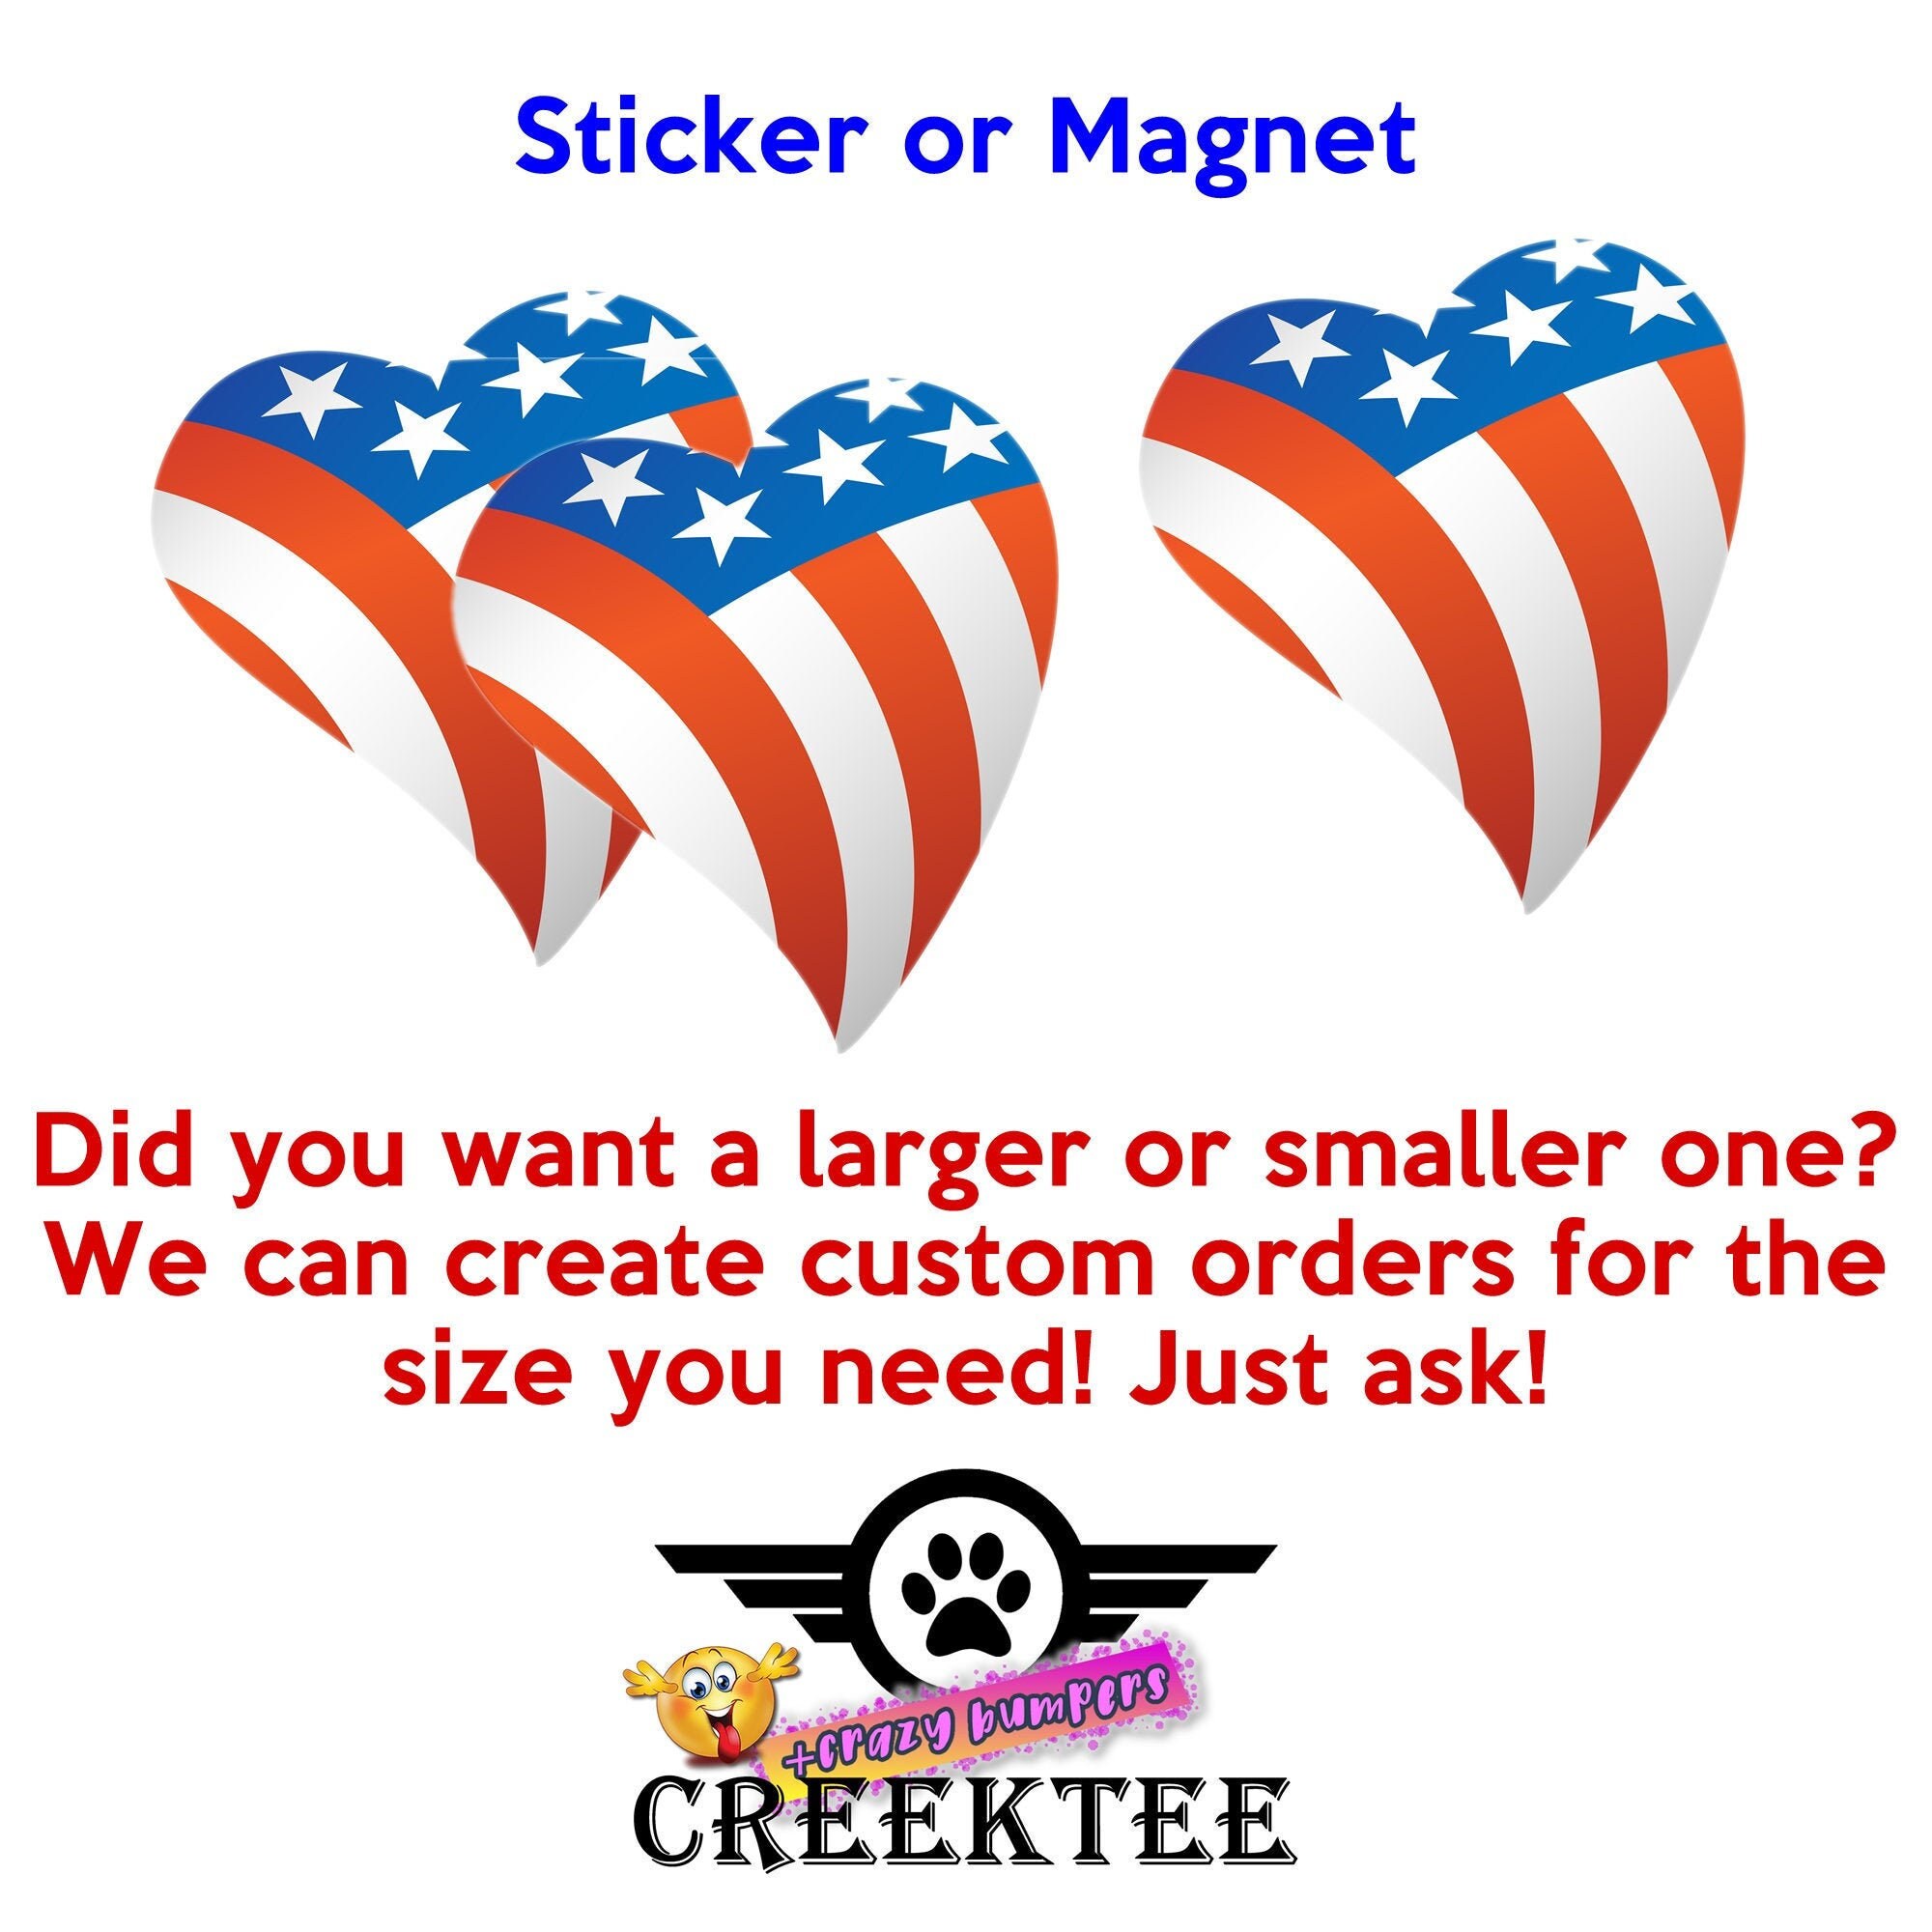 12 USA american pride heart stickers or magnets 2 inch by 2 inch other sizes available ask us for larger sizes and pricing